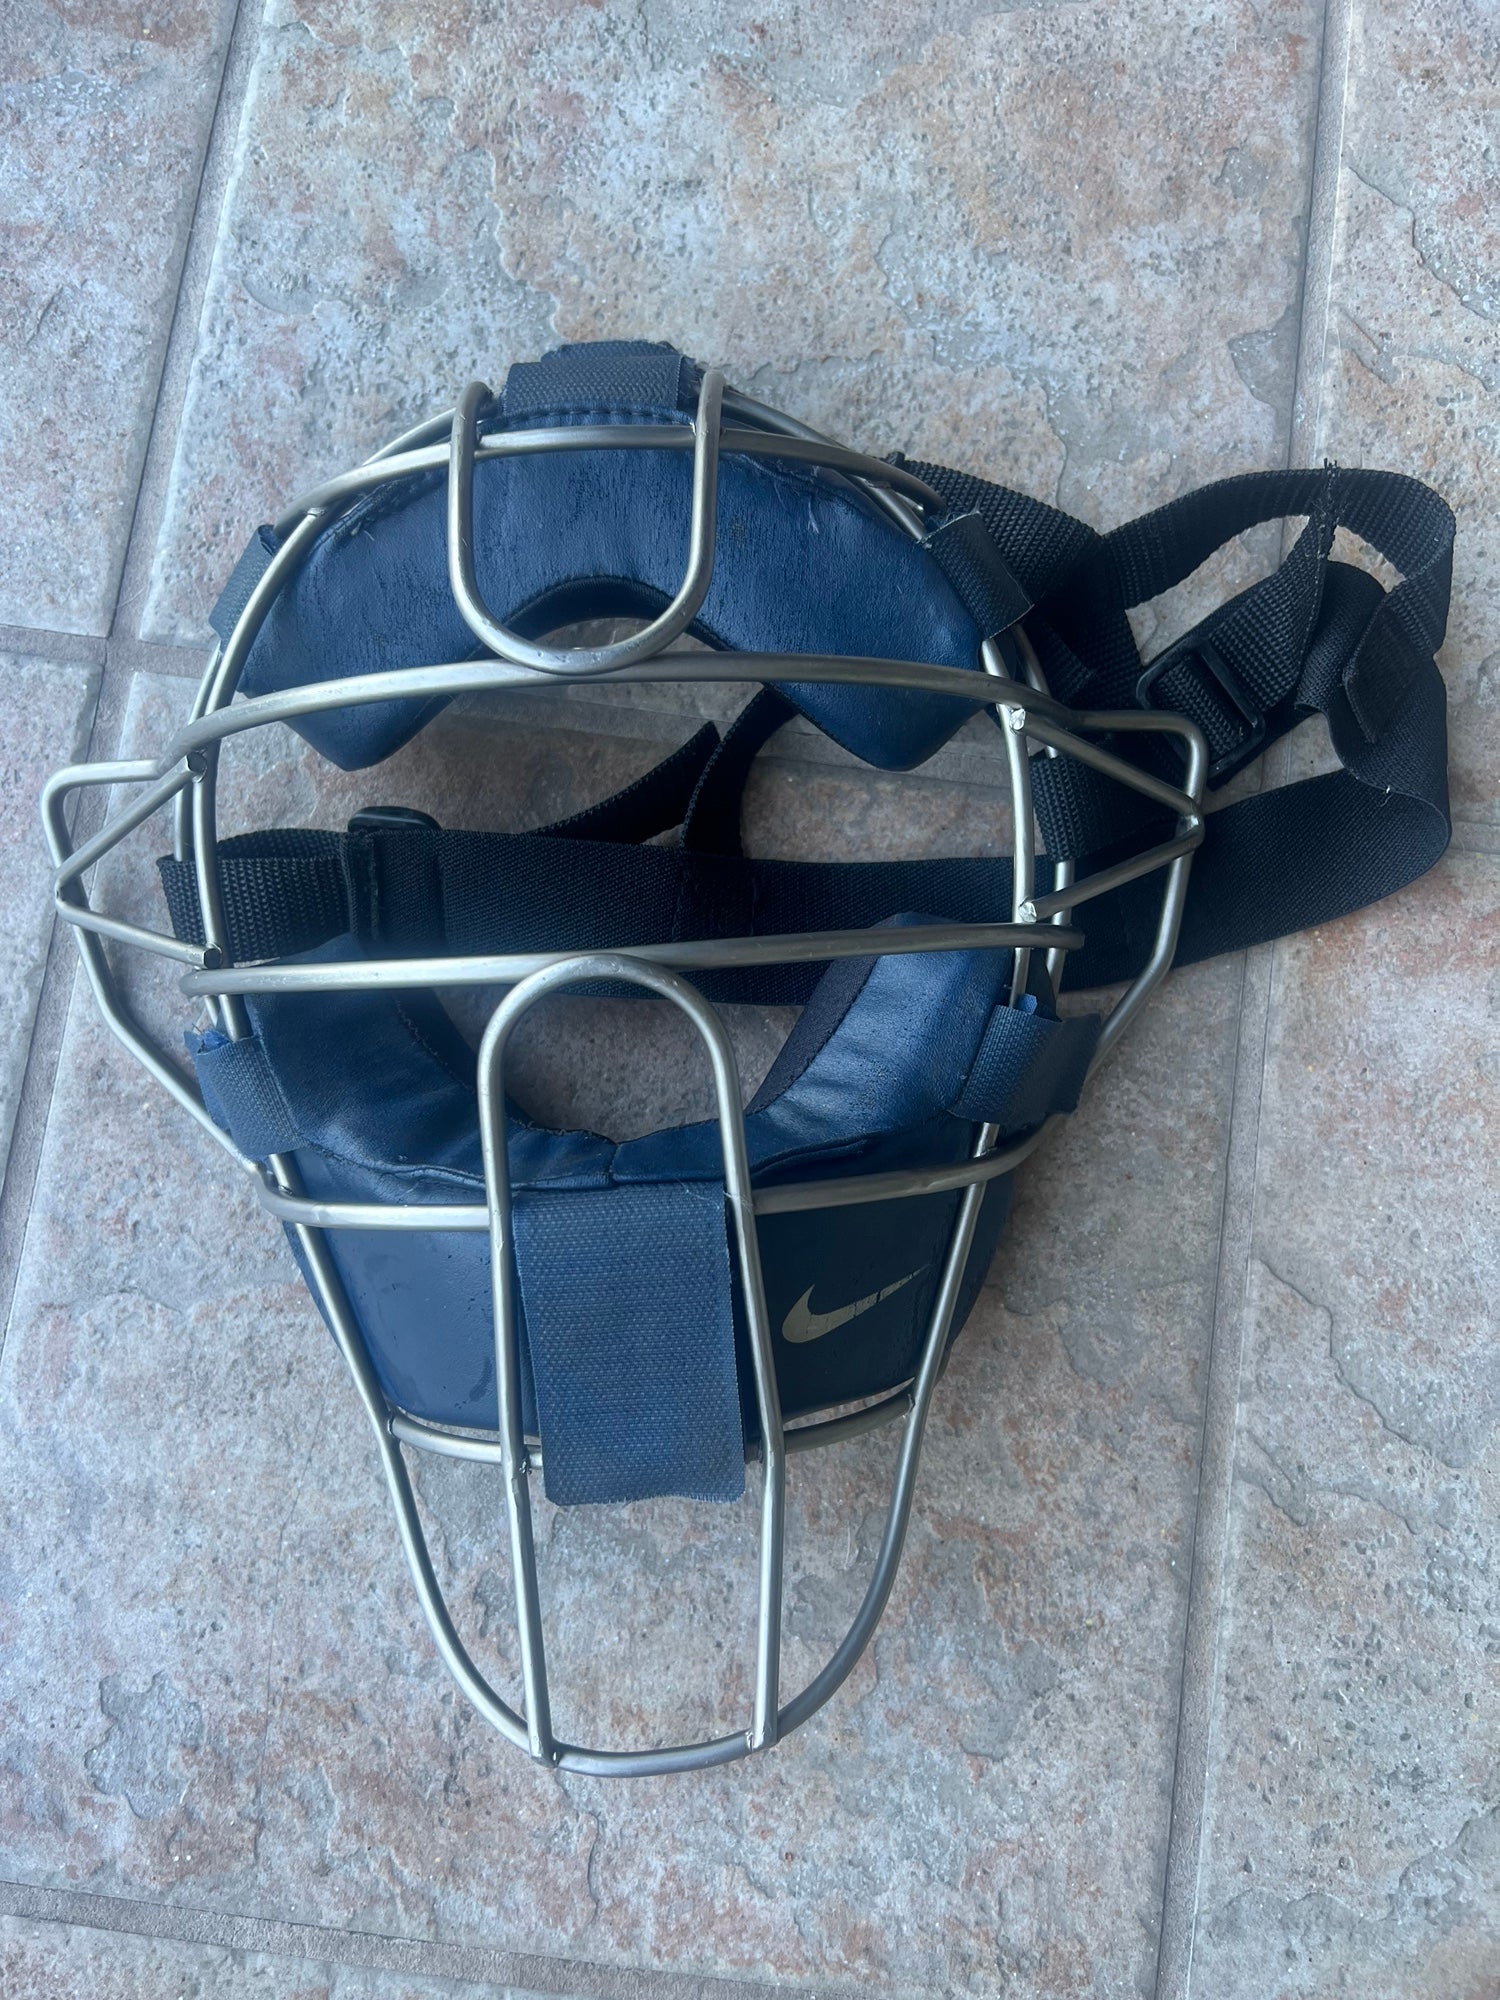 Team Issued Catcher's Gear - Blue and Orange Nike Set - Chest Protector,  Shin Guards, Face Mask and Bag - 2018 Season